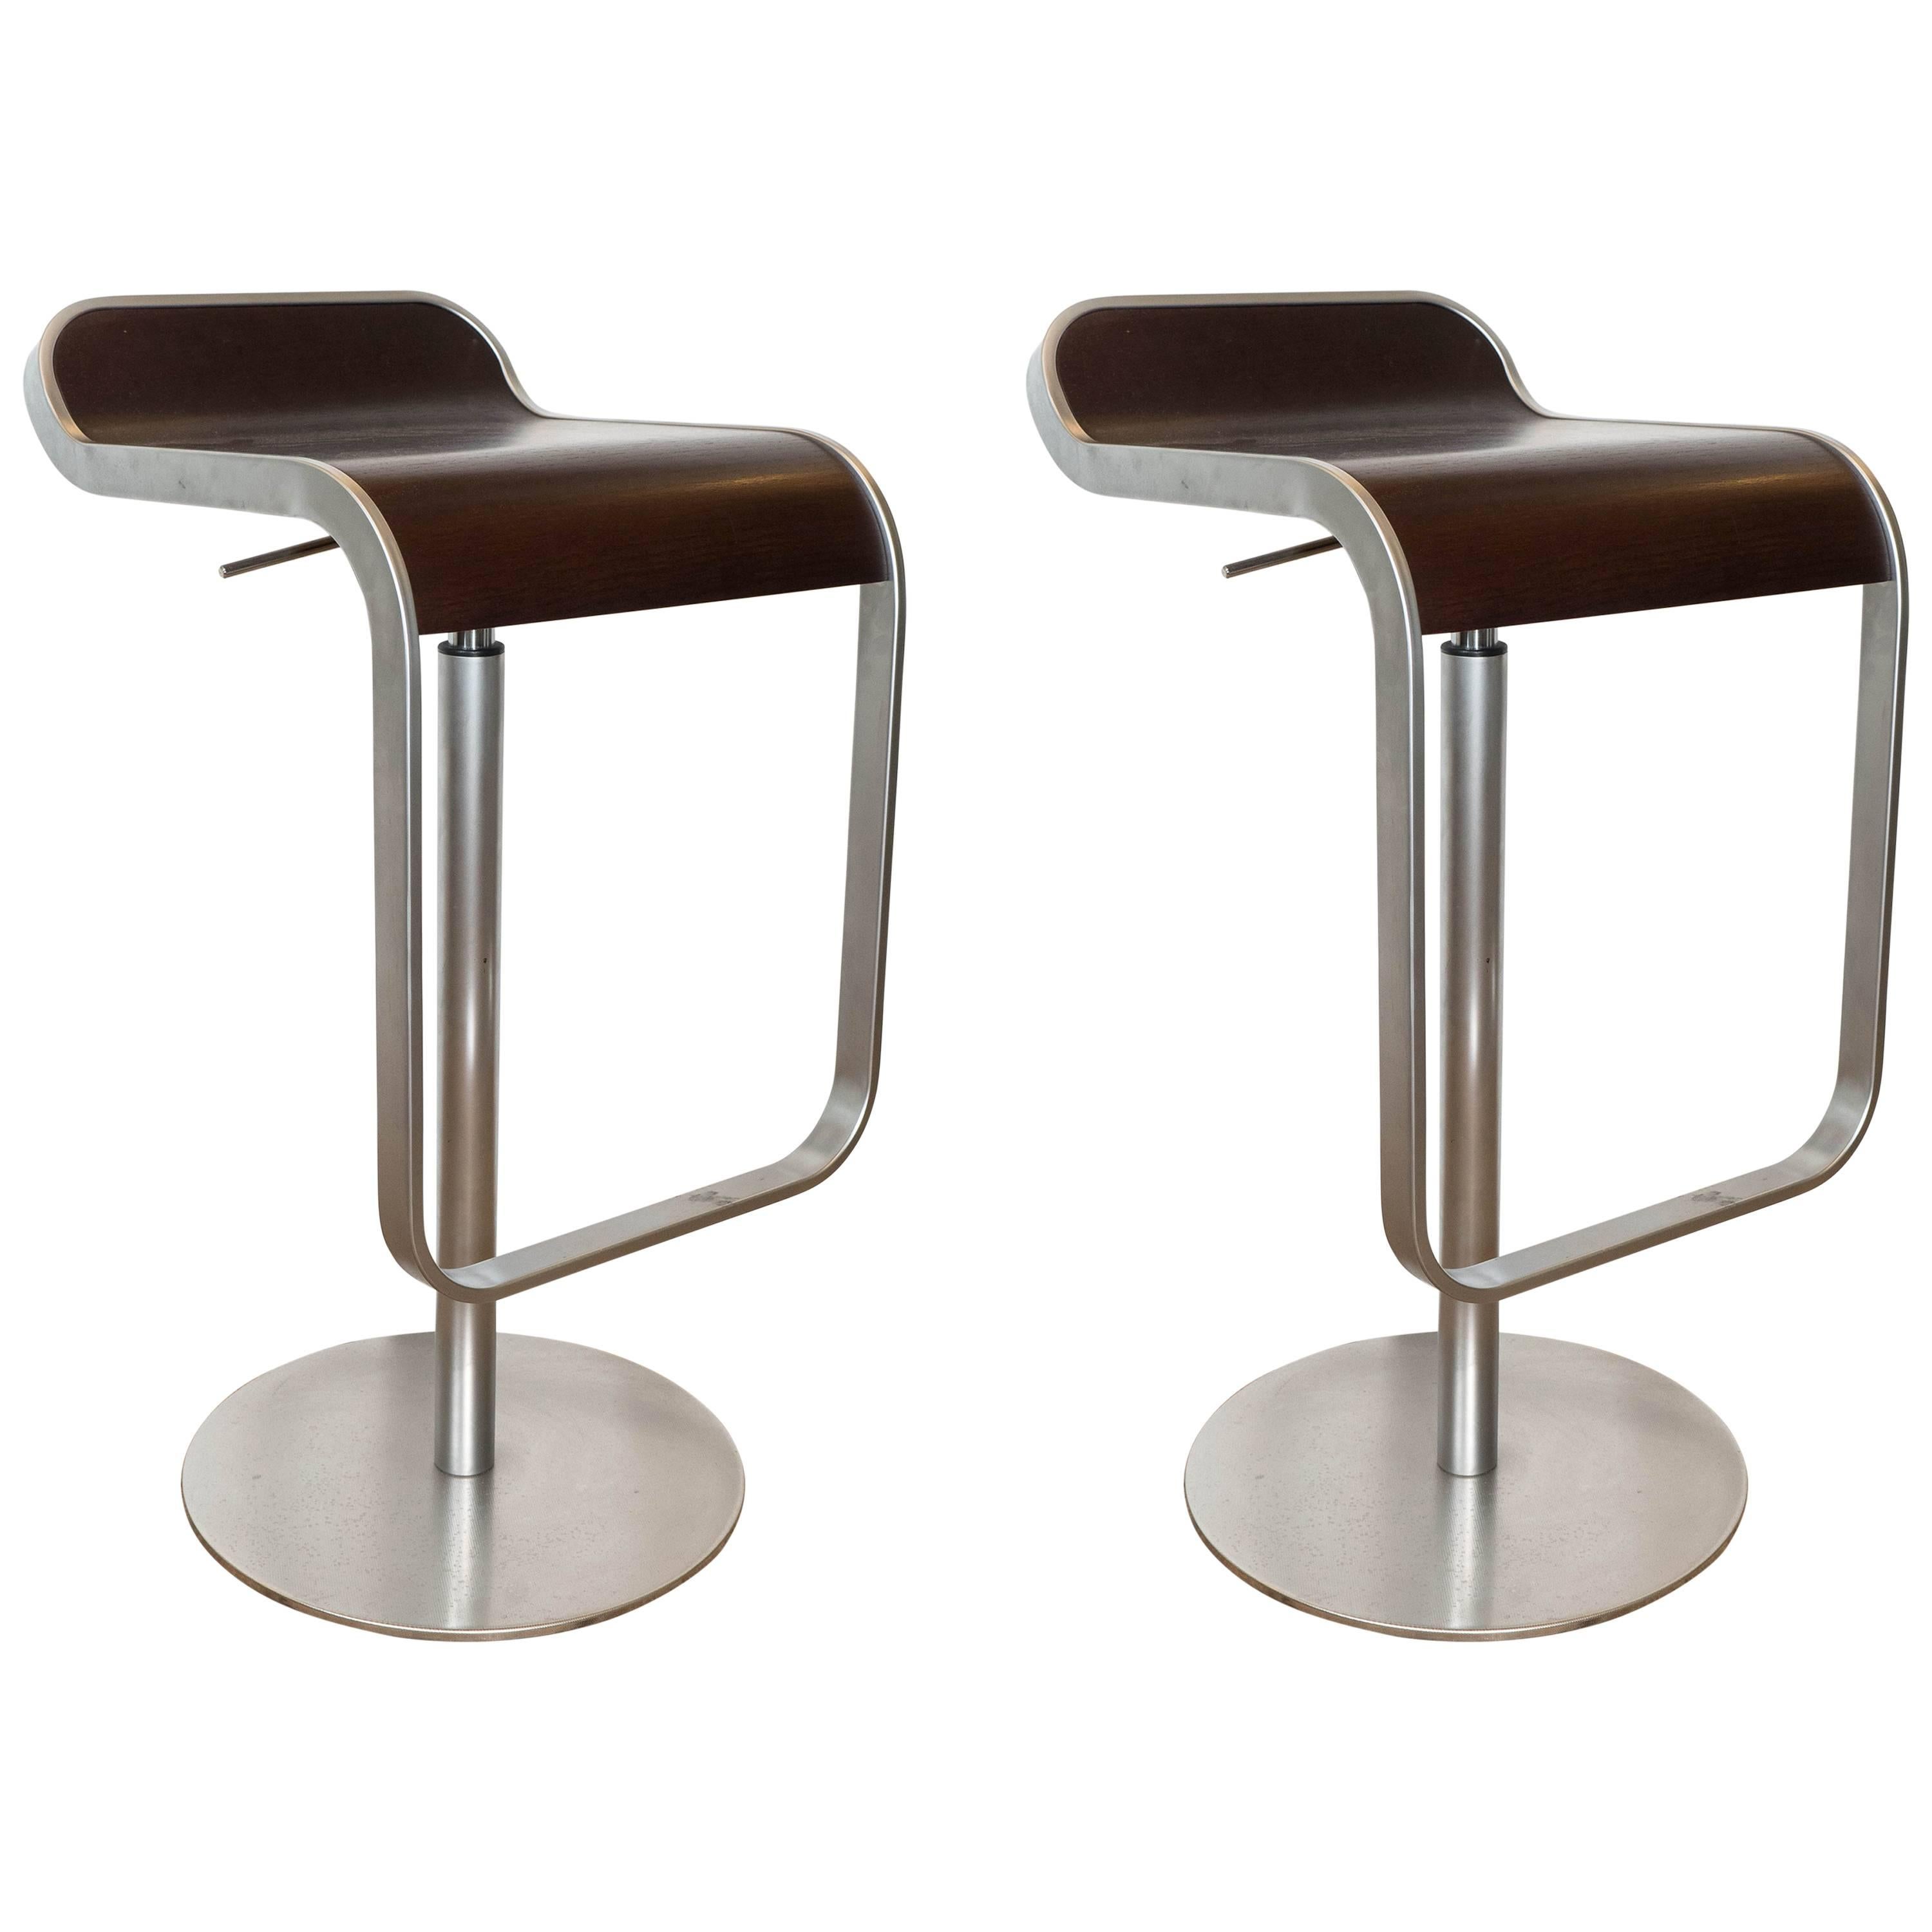 Pair of Lem Piston Barstools in Walnut and Chrome for LaPalma